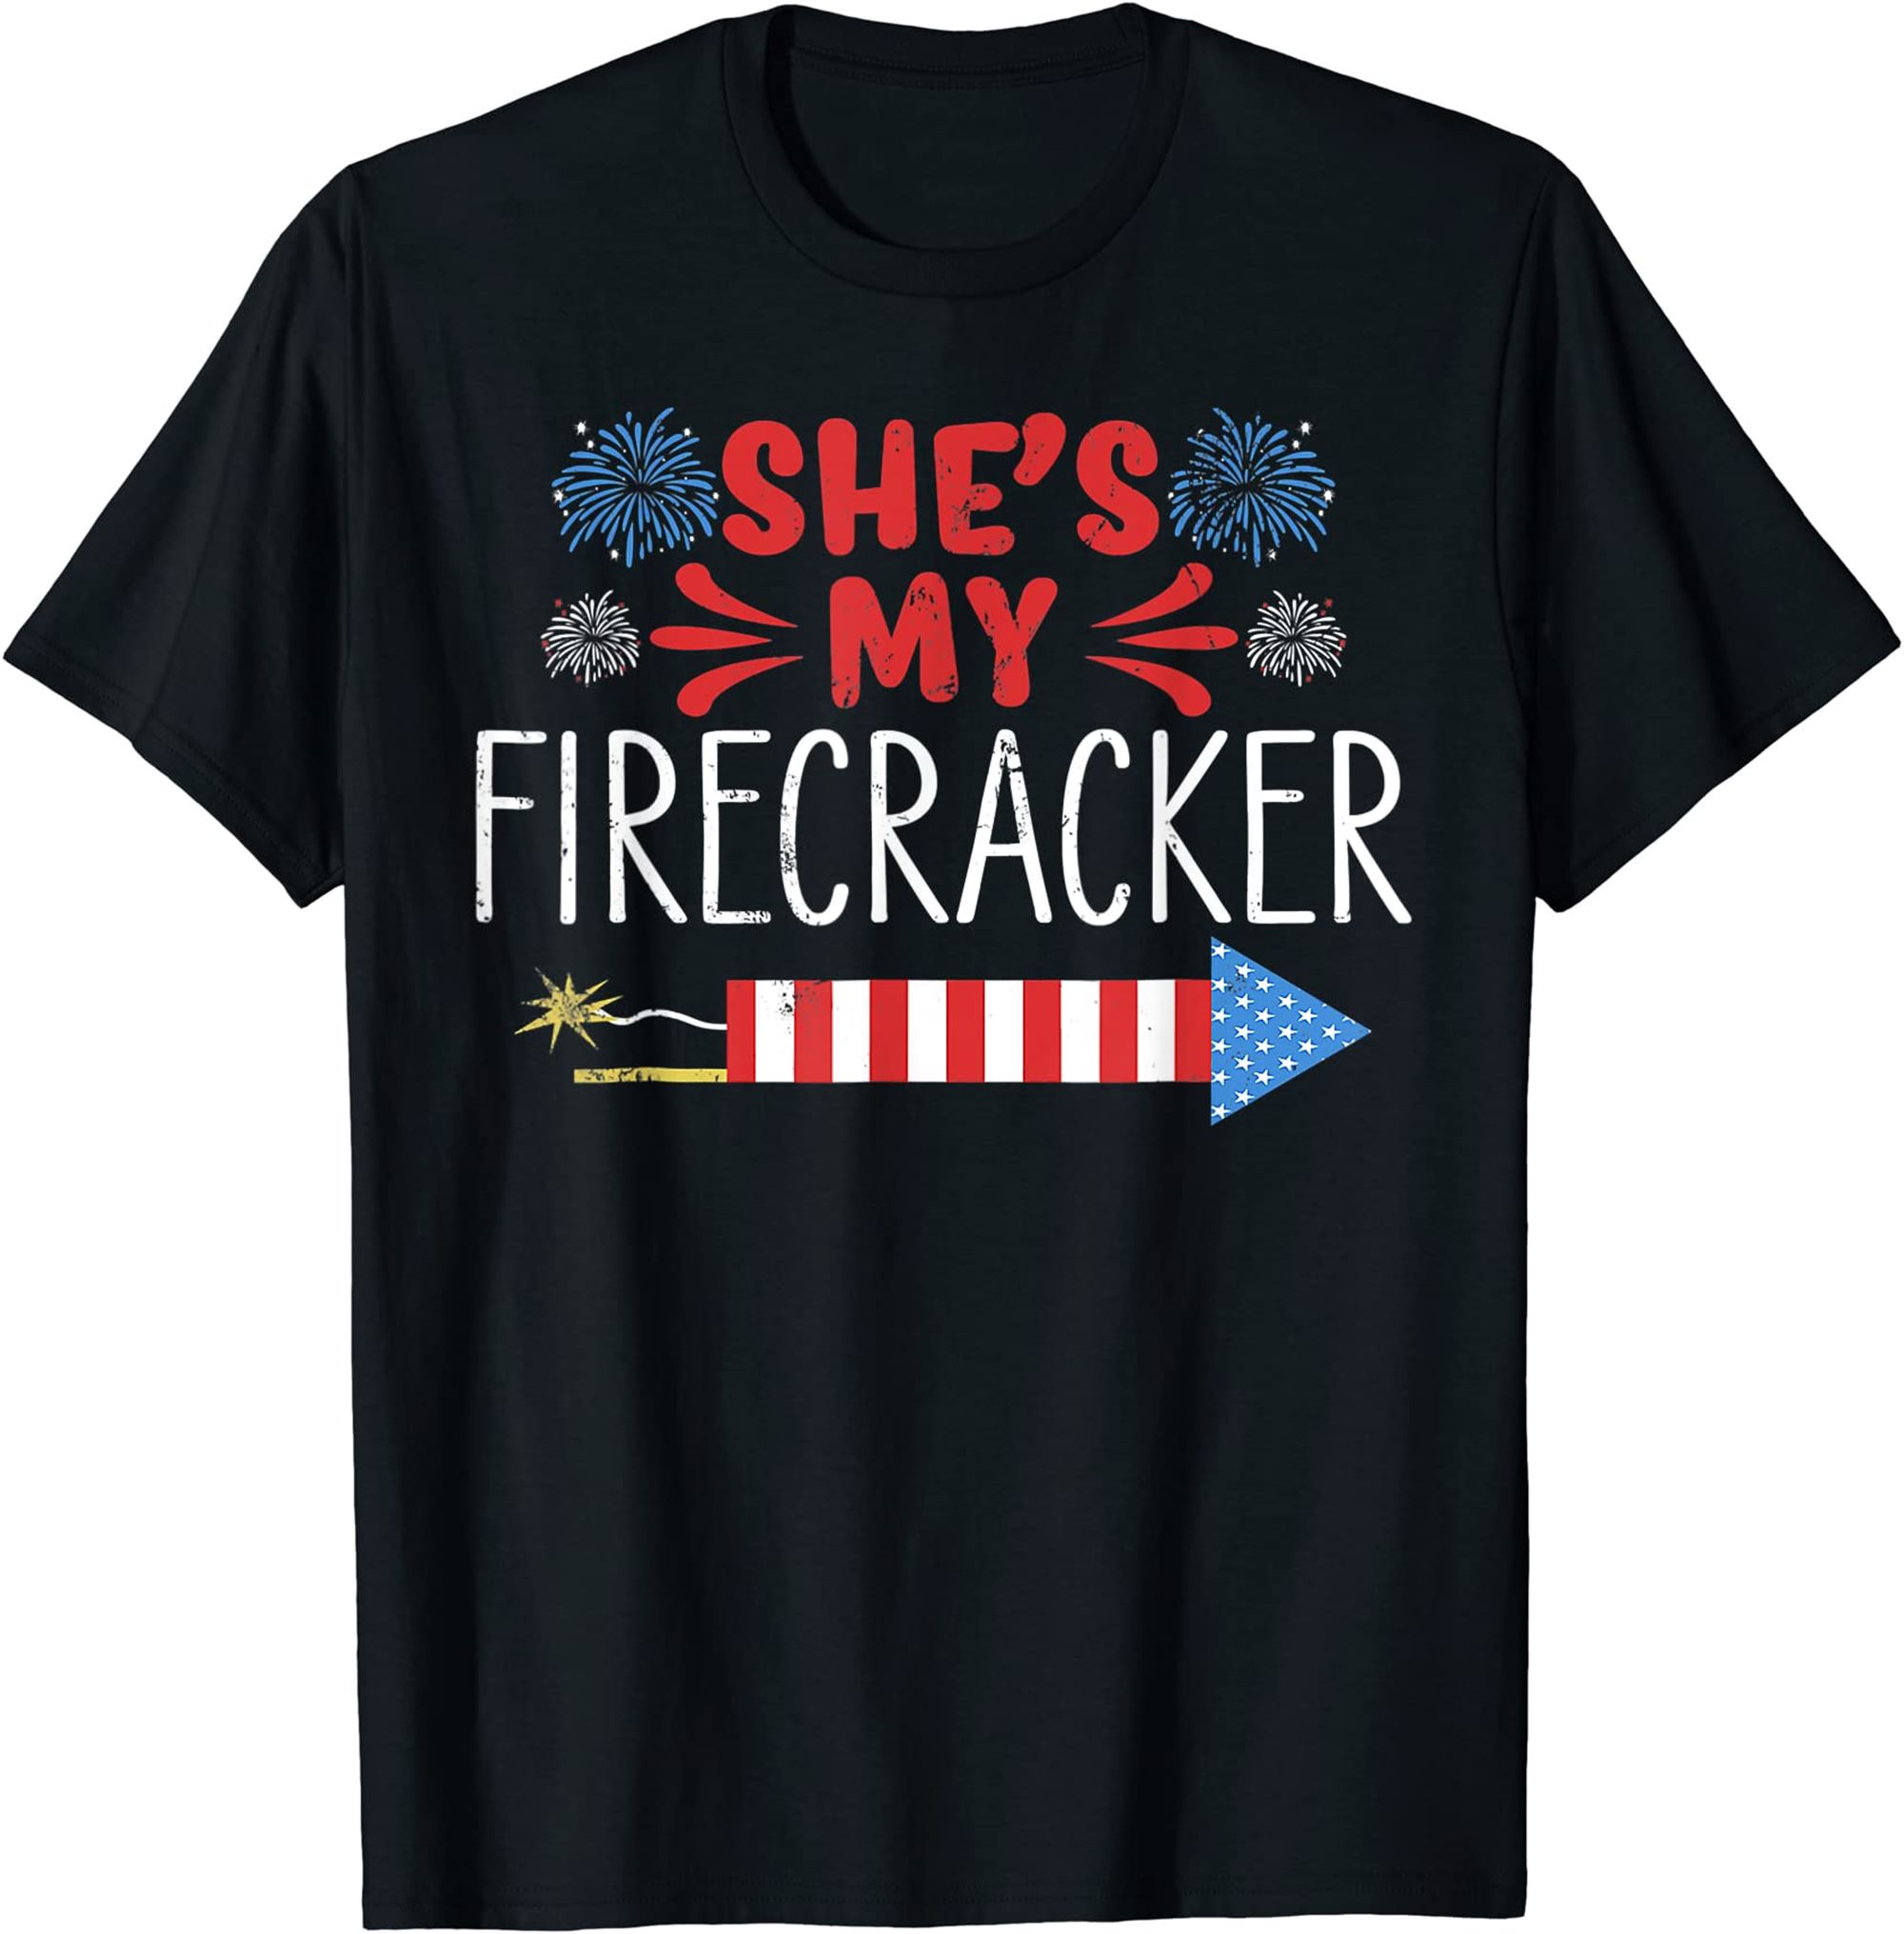 Shes My Firecracker 4th Of July Matching Couples His And Her T-shirt Size Up To 5xl